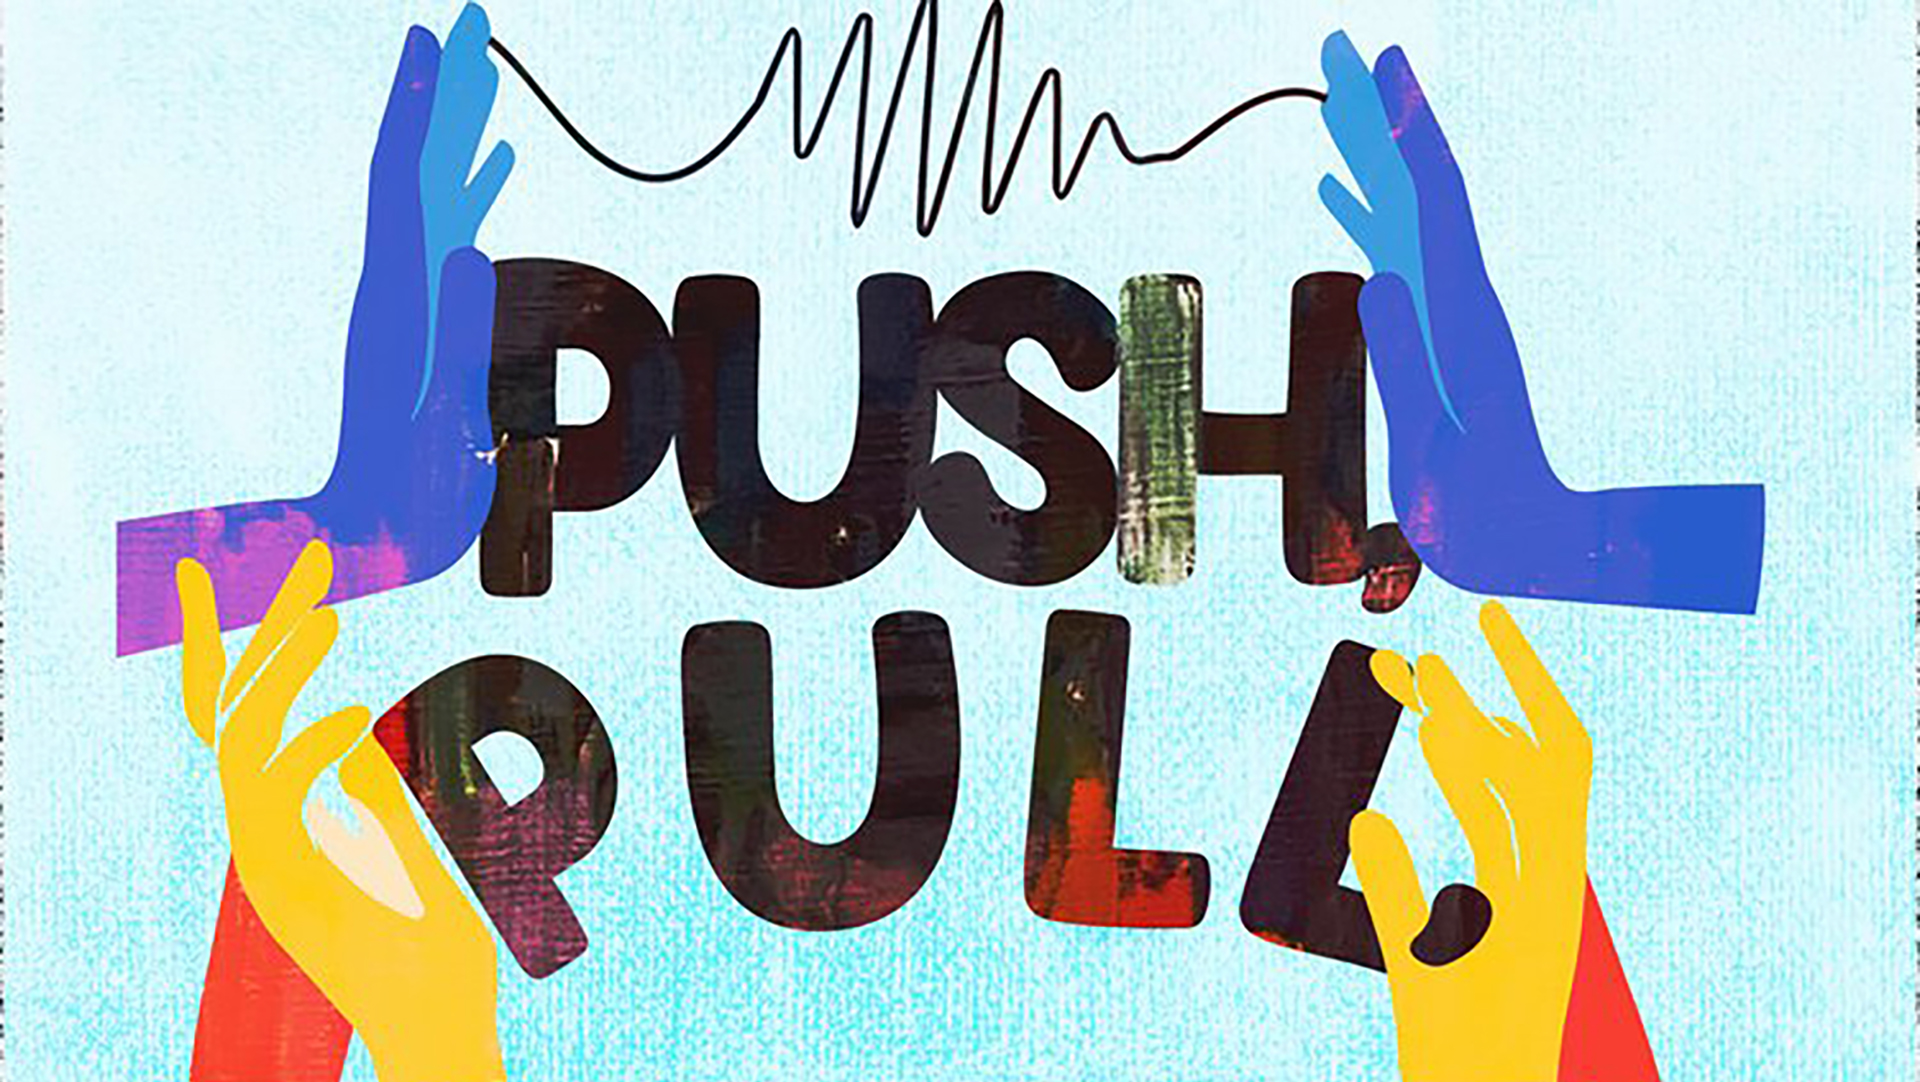 push pull together apart april 22, 2023 at the everson museum of art in syracuse ny